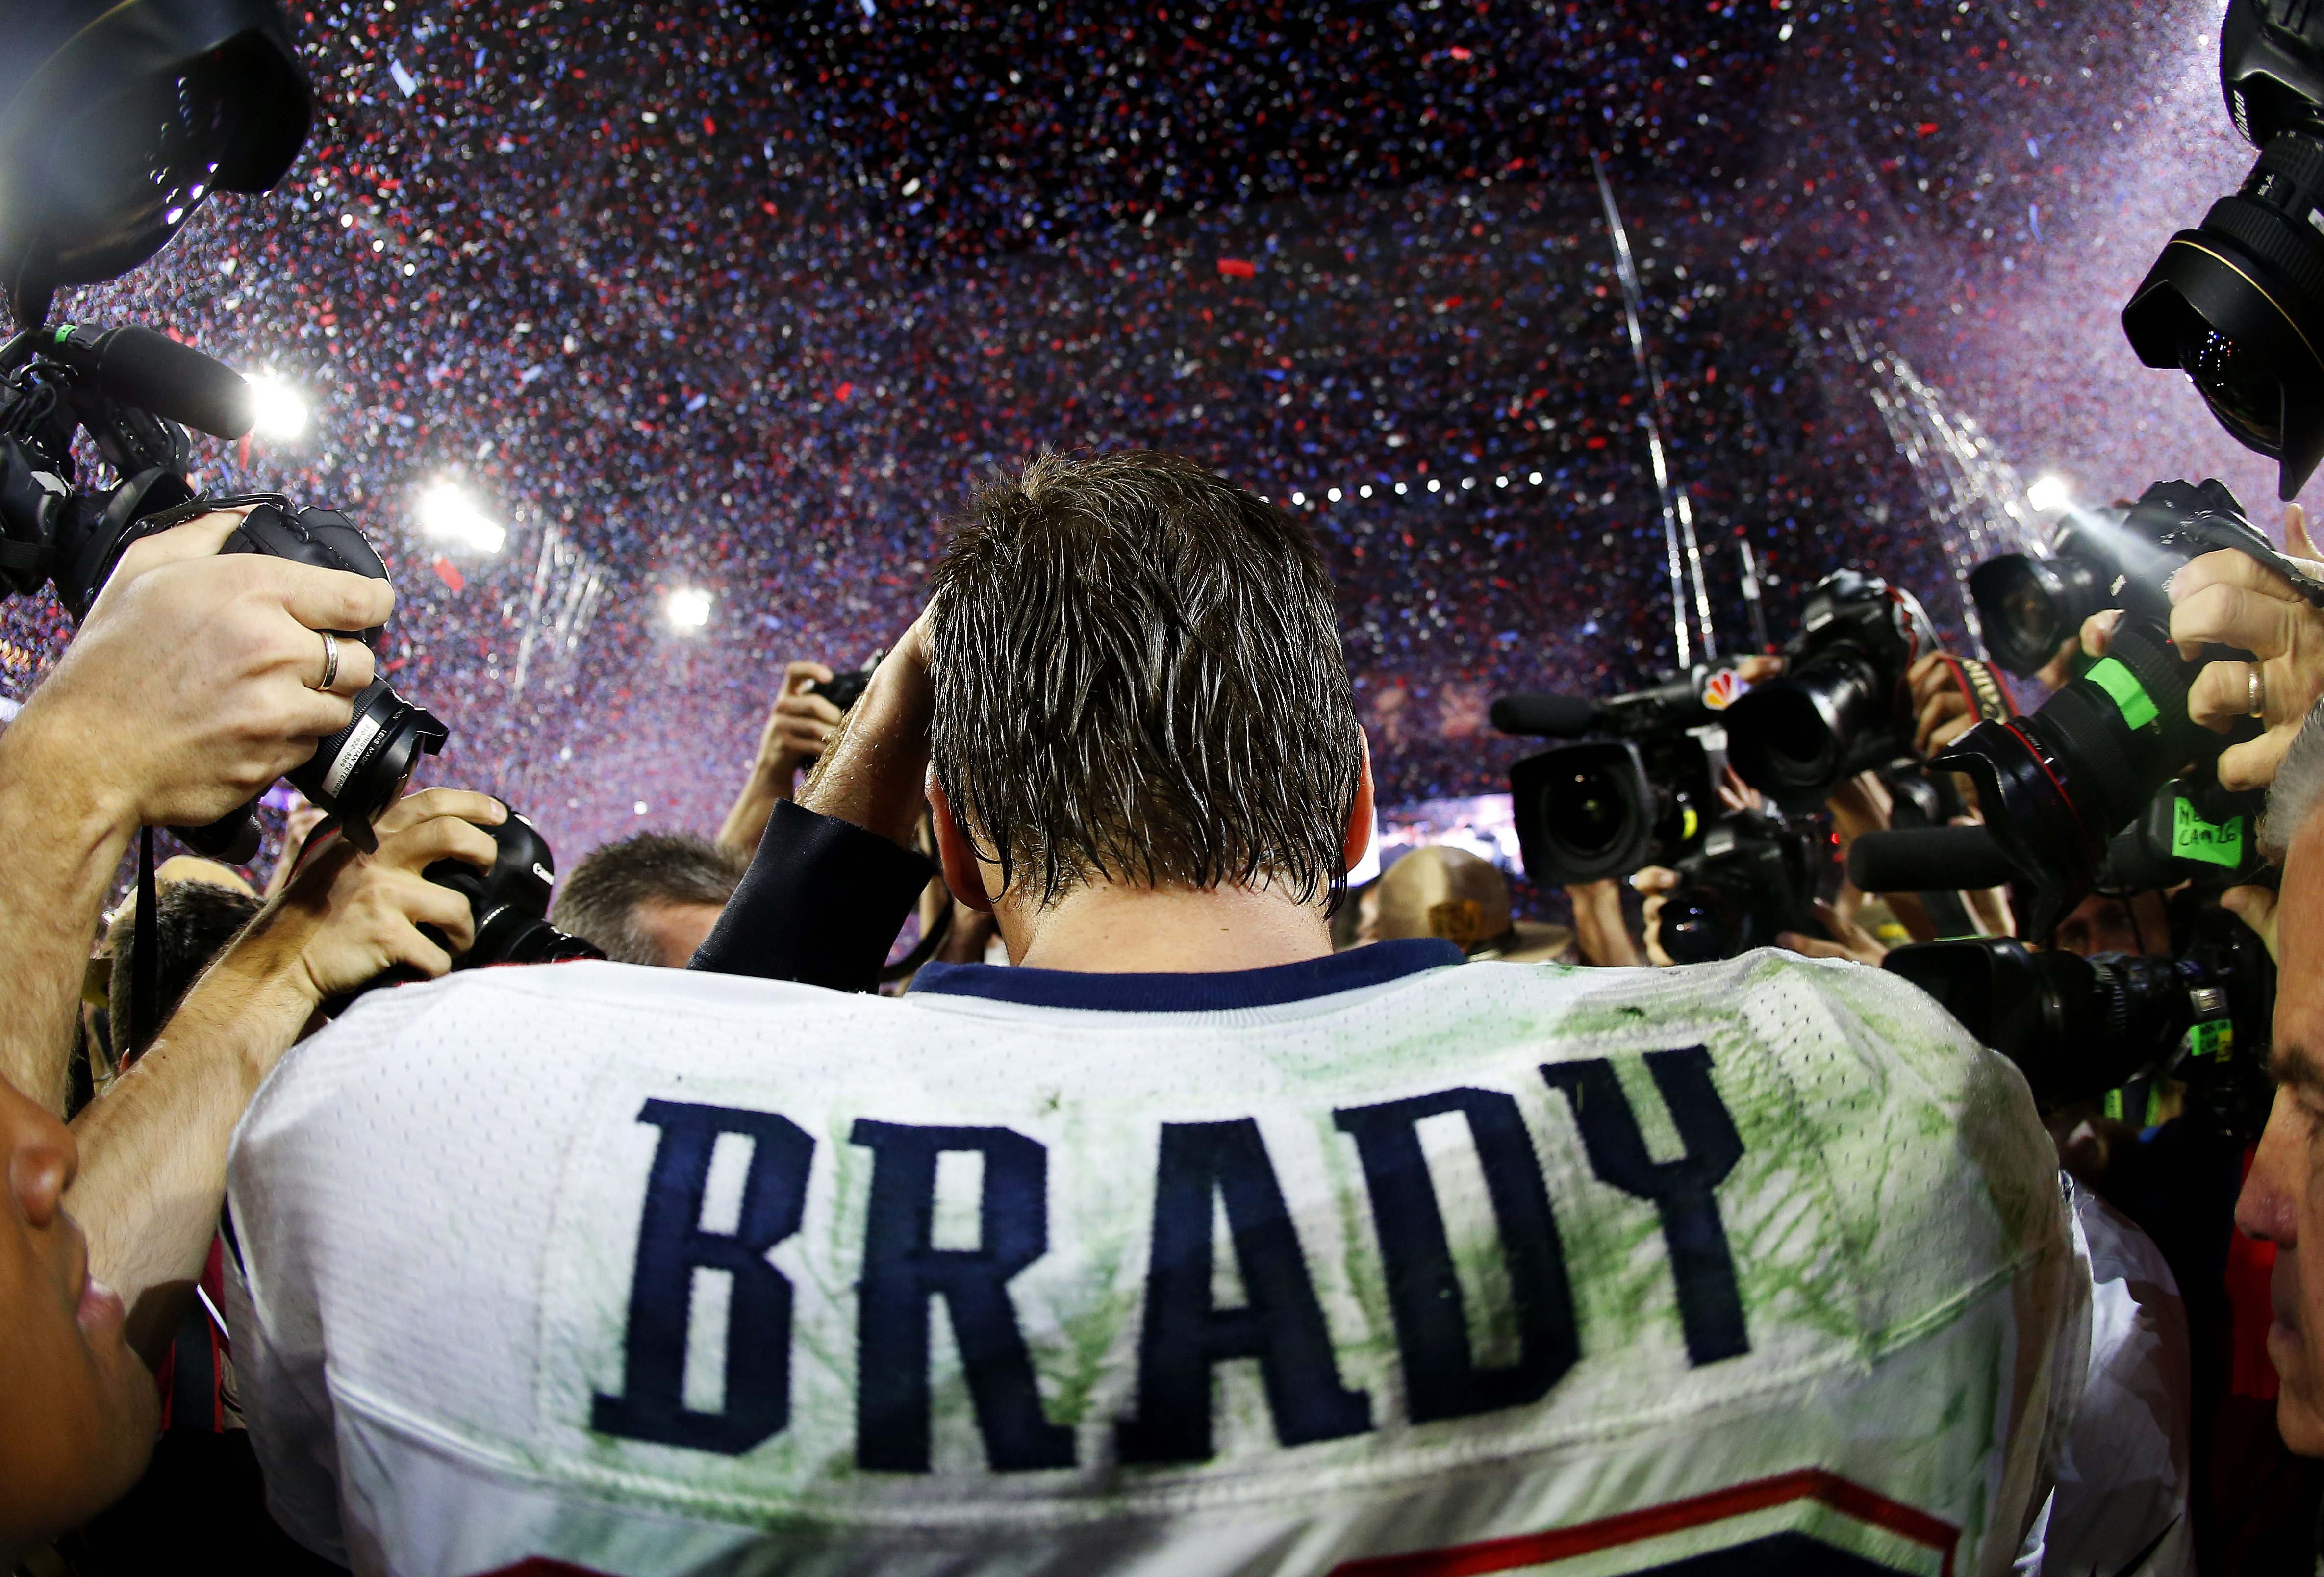 Tom Brady #12 of the New England Patriots is surrounded by the media after defeating the Seattle Seahawks 28-24 during Super Bowl XLIX at University of Phoenix Stadium on February 1, 2015 in Glendale, Arizona. (Tom Pennington—Getty Images)